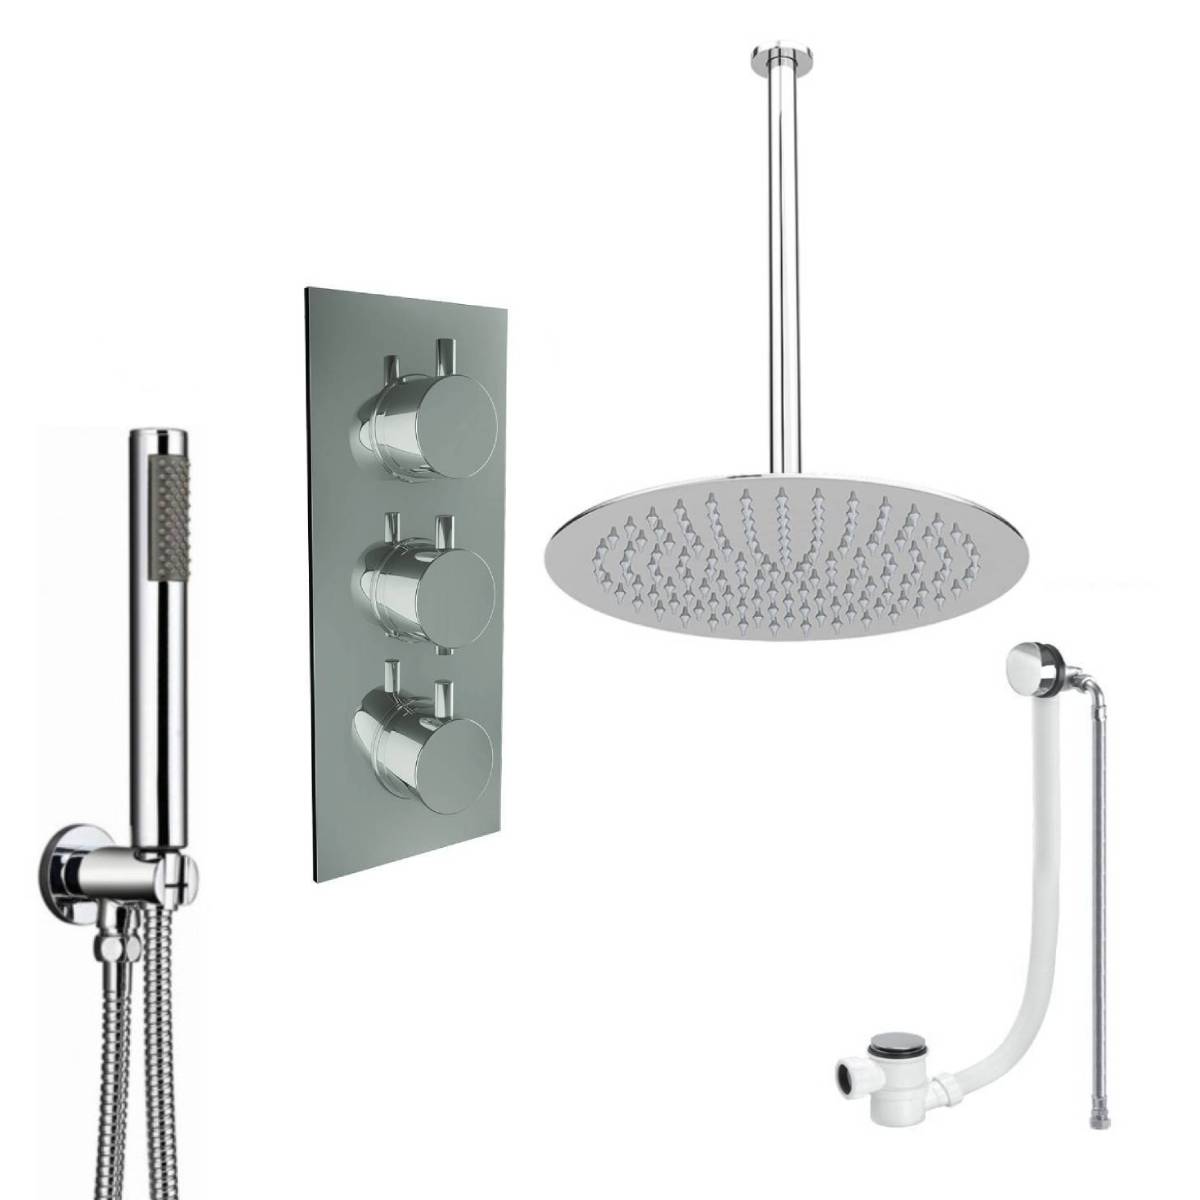 Round Triple Thermostatic Concealed Mixer Shower Kit with Ceiling Mounted 200mm Shower Head, Handset & Overflow Filler (12486)